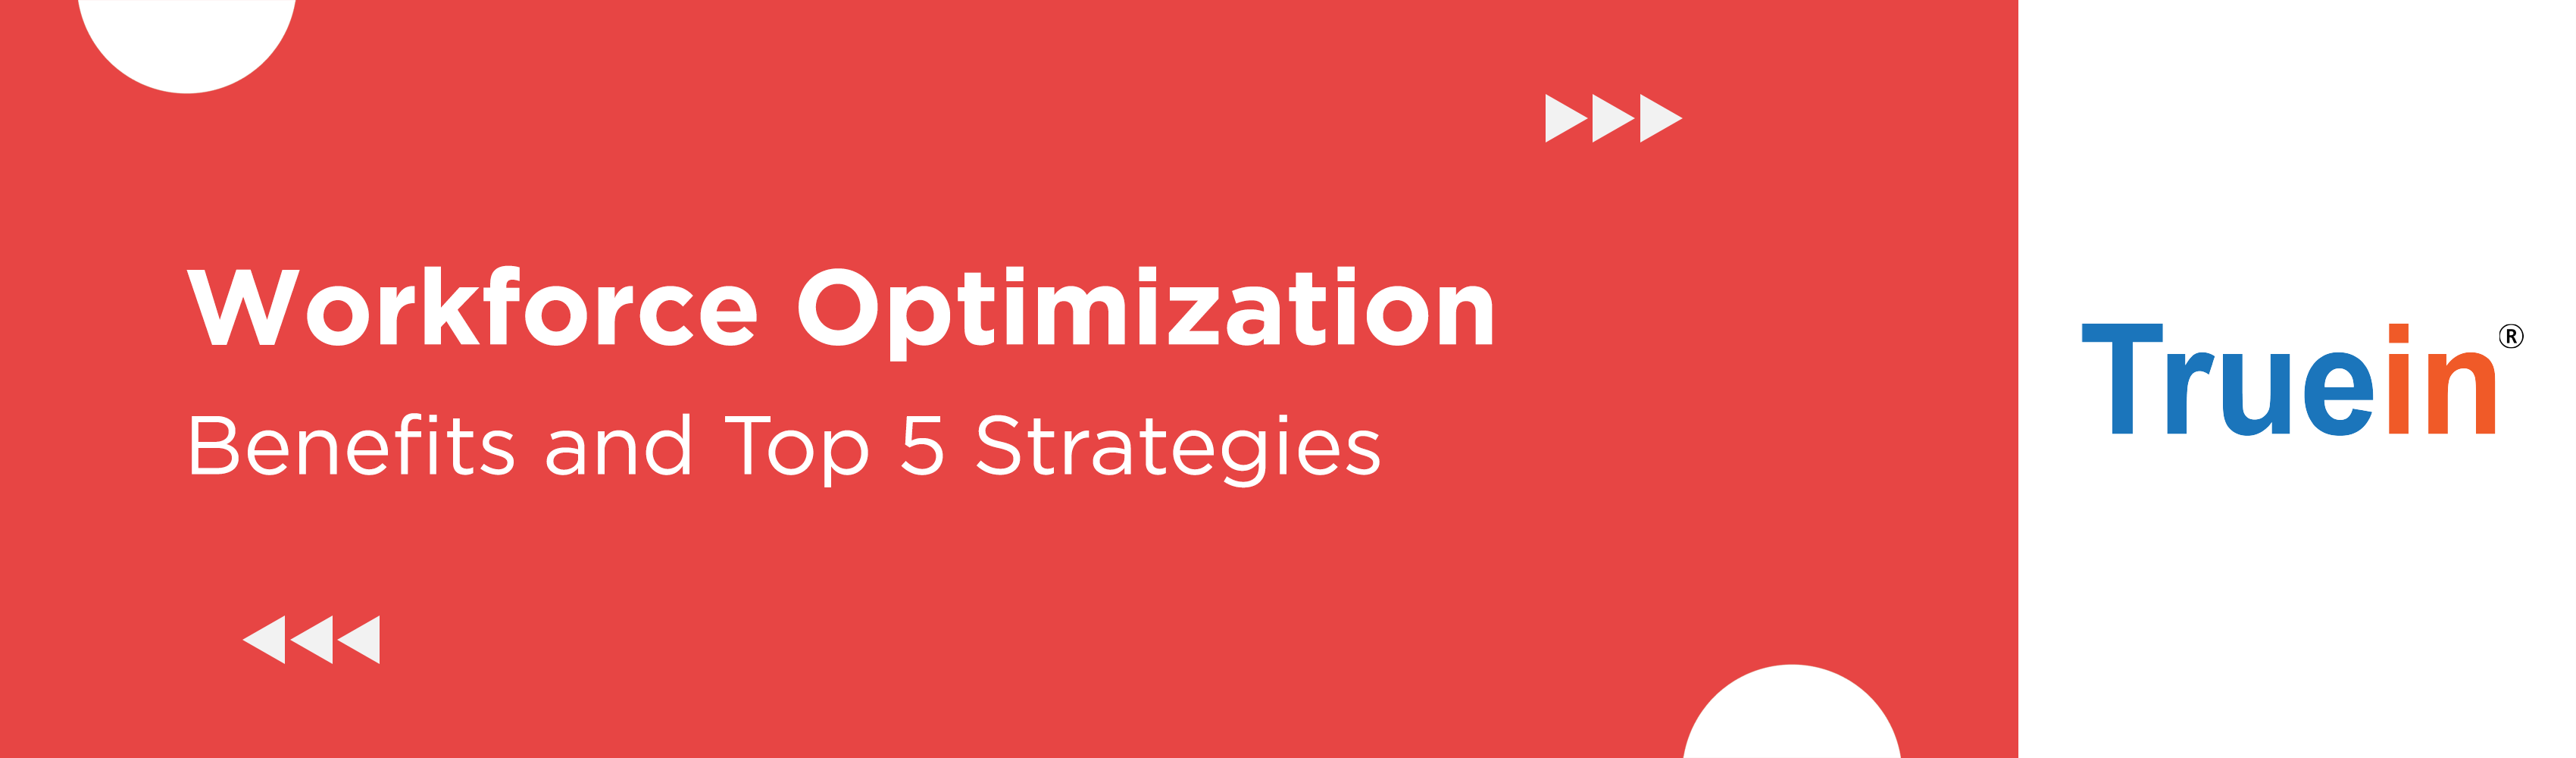 What Is Workforce Optimization? Benefits and Top 5 Strategies